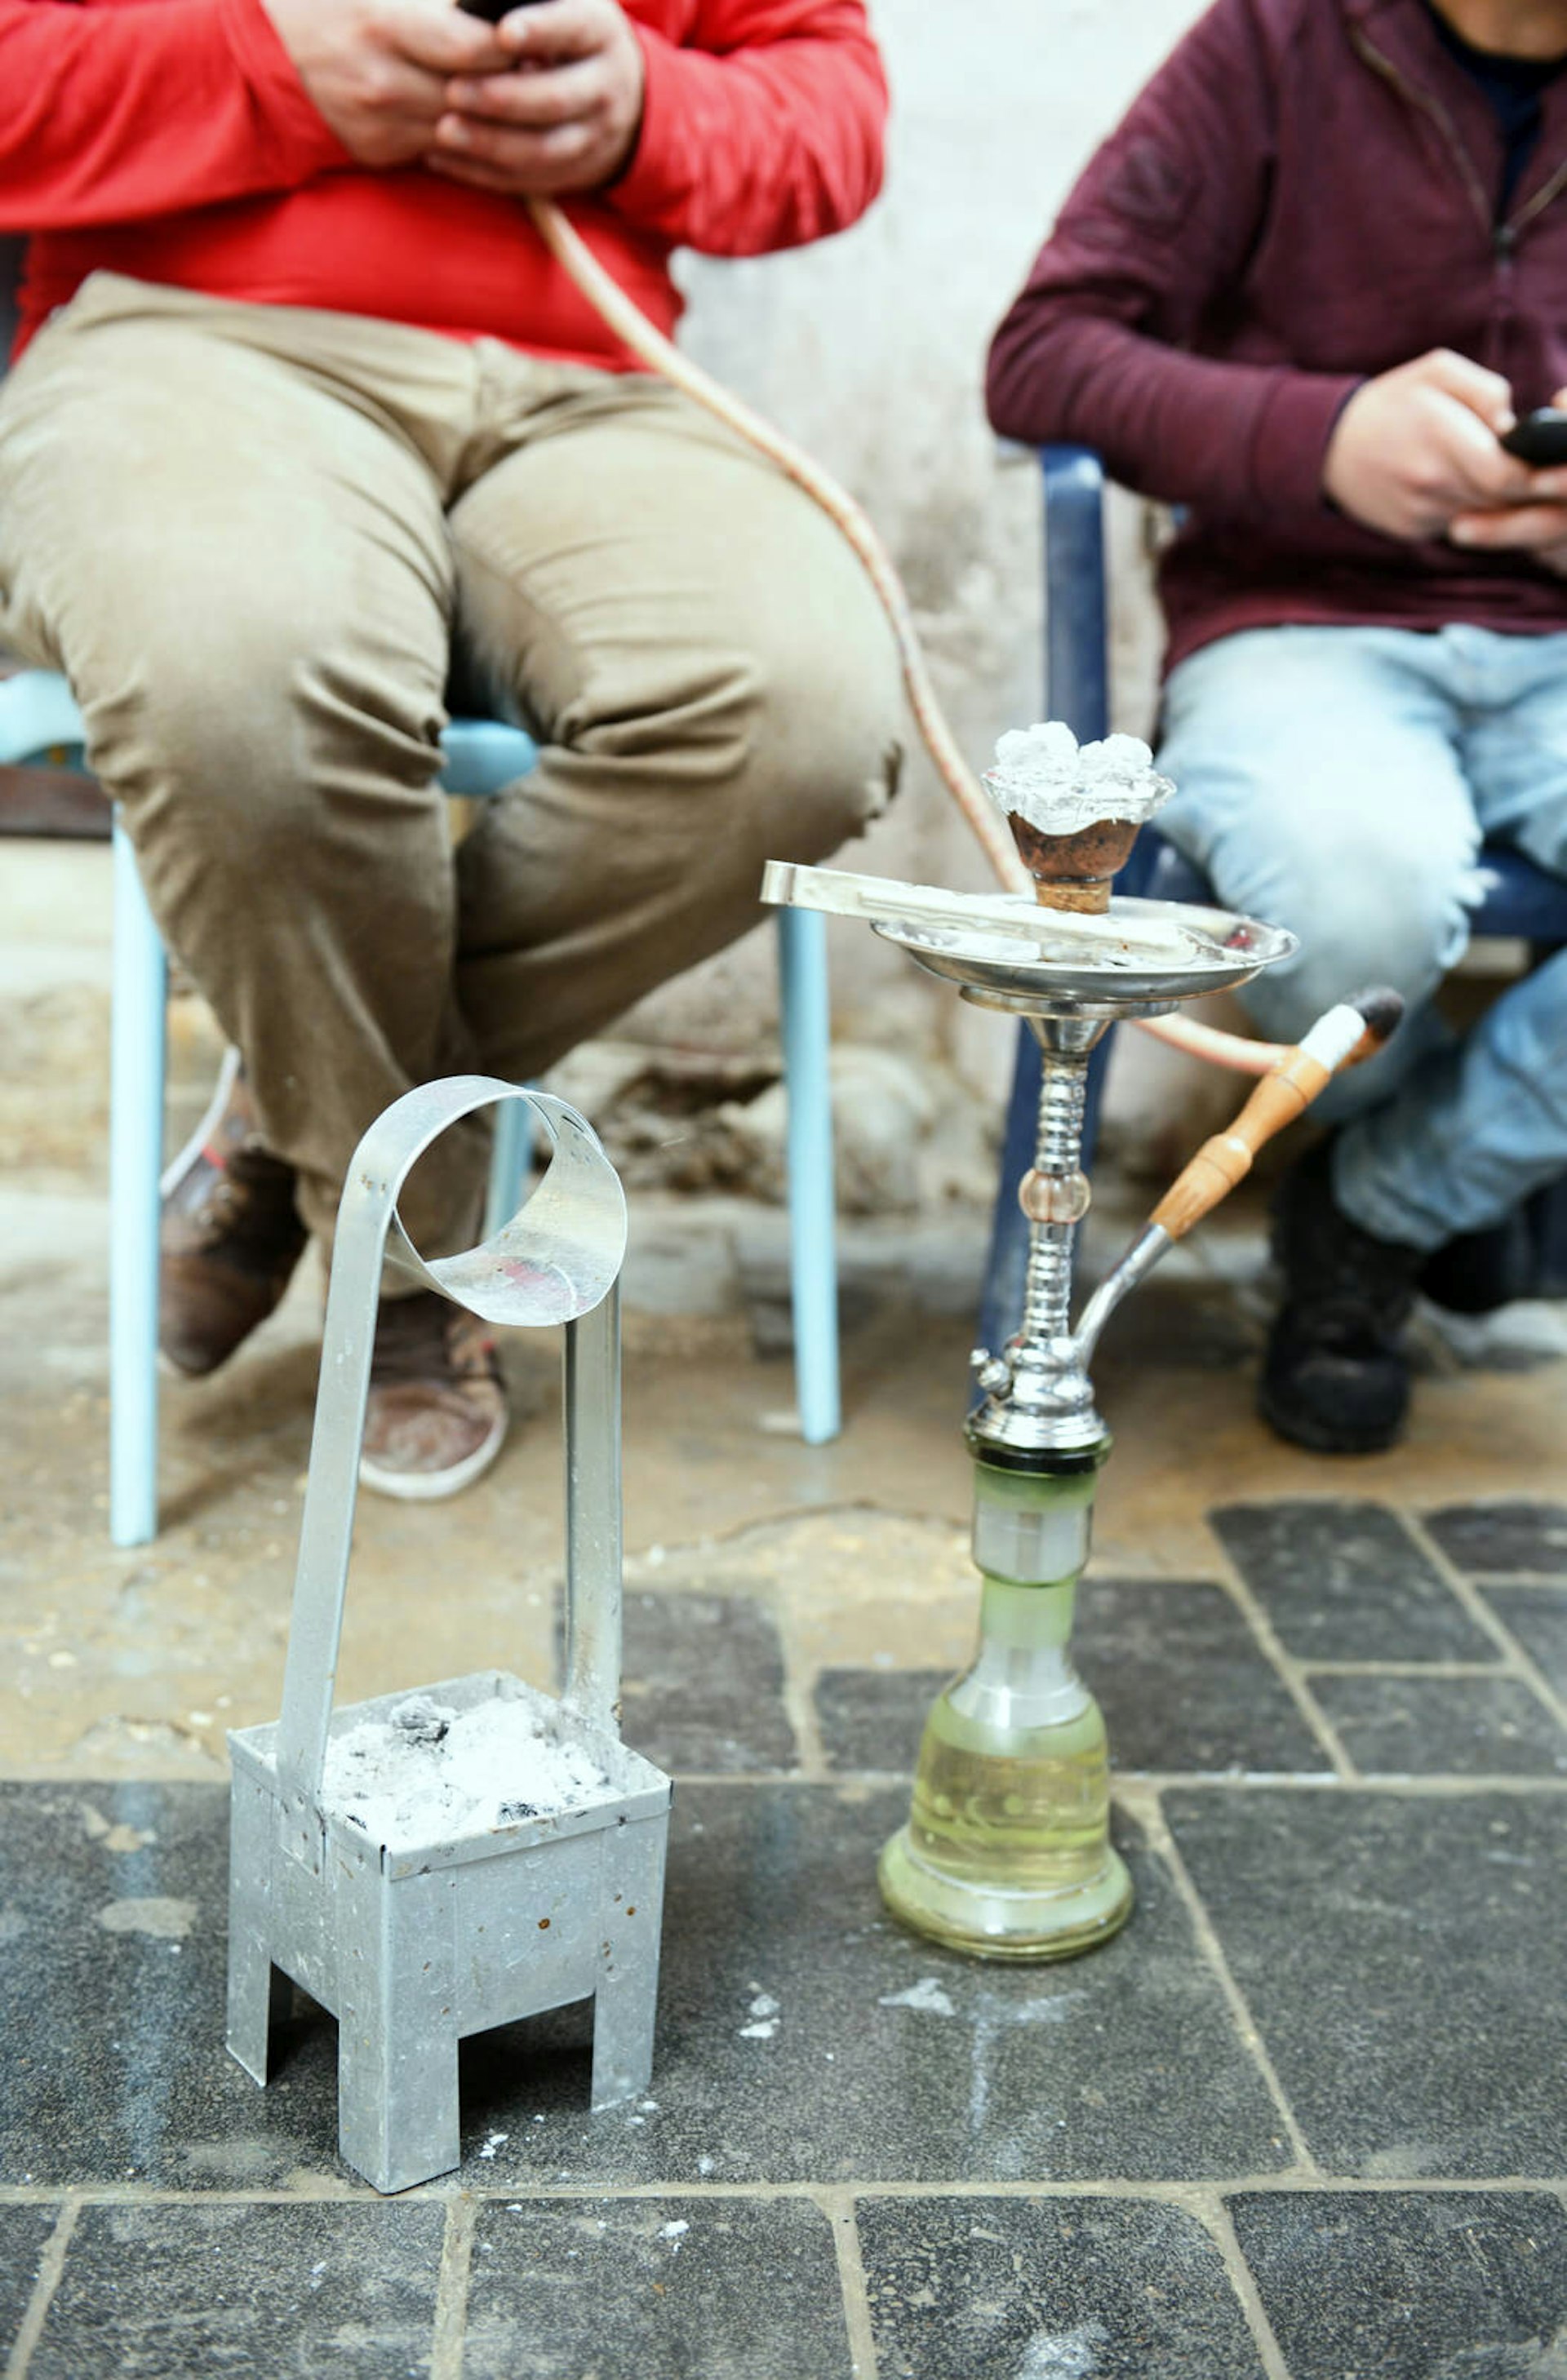 A hookah, a traditional Middle Eastern, device for smoking tobacco, sits on a sidewalk in Lebanon, with two smokers in chairs behind